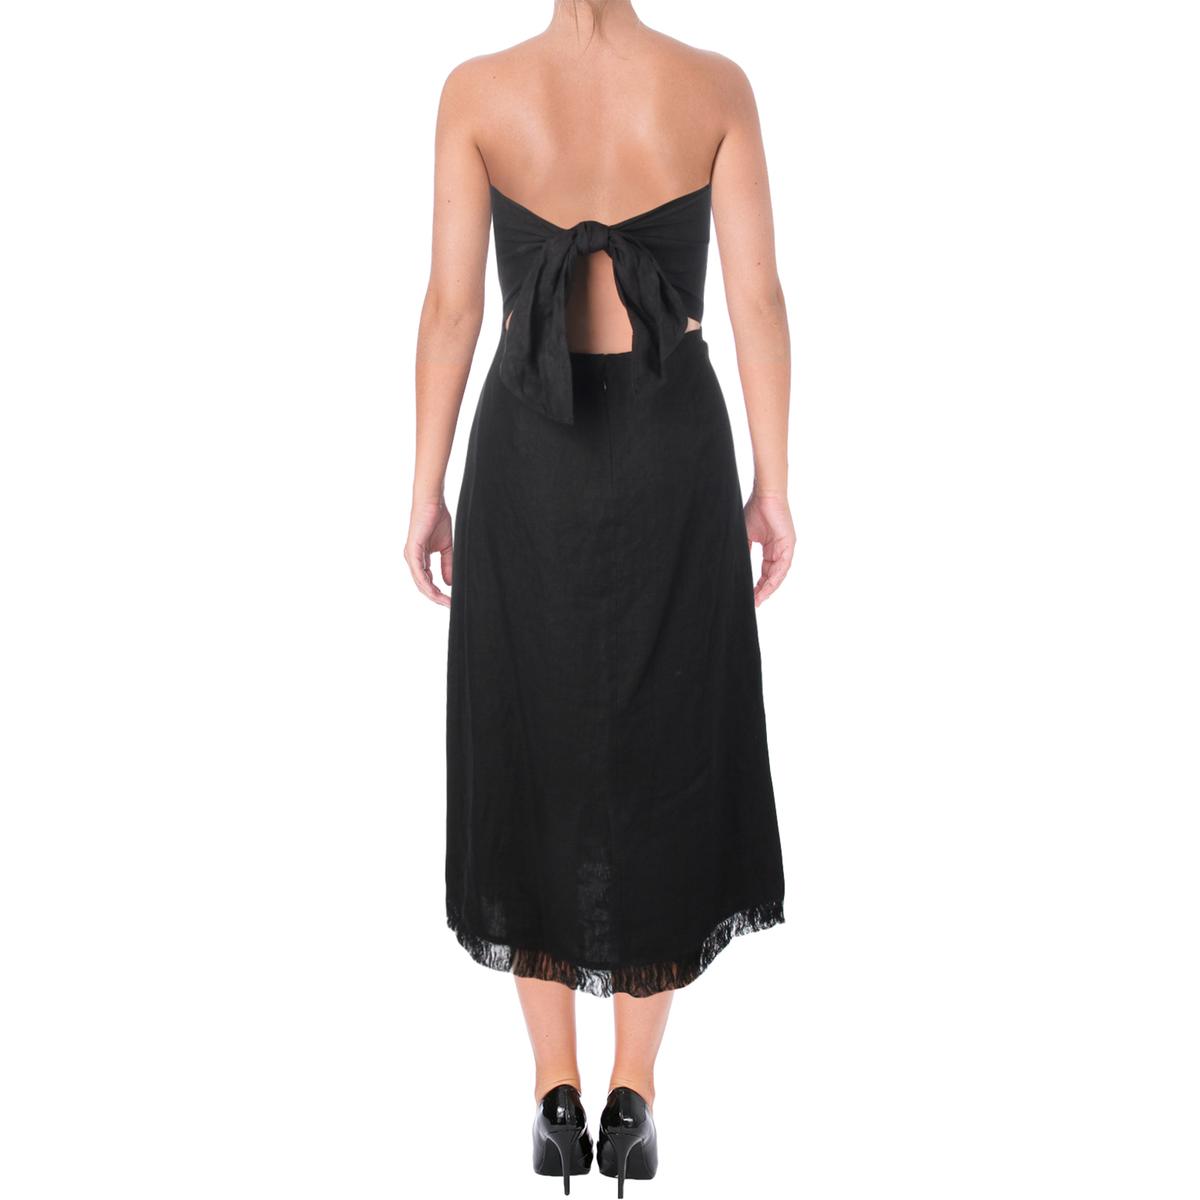 Theory Womens Phyly Black Linen Open Back Party Dress 00 BHFO 5777 | eBay